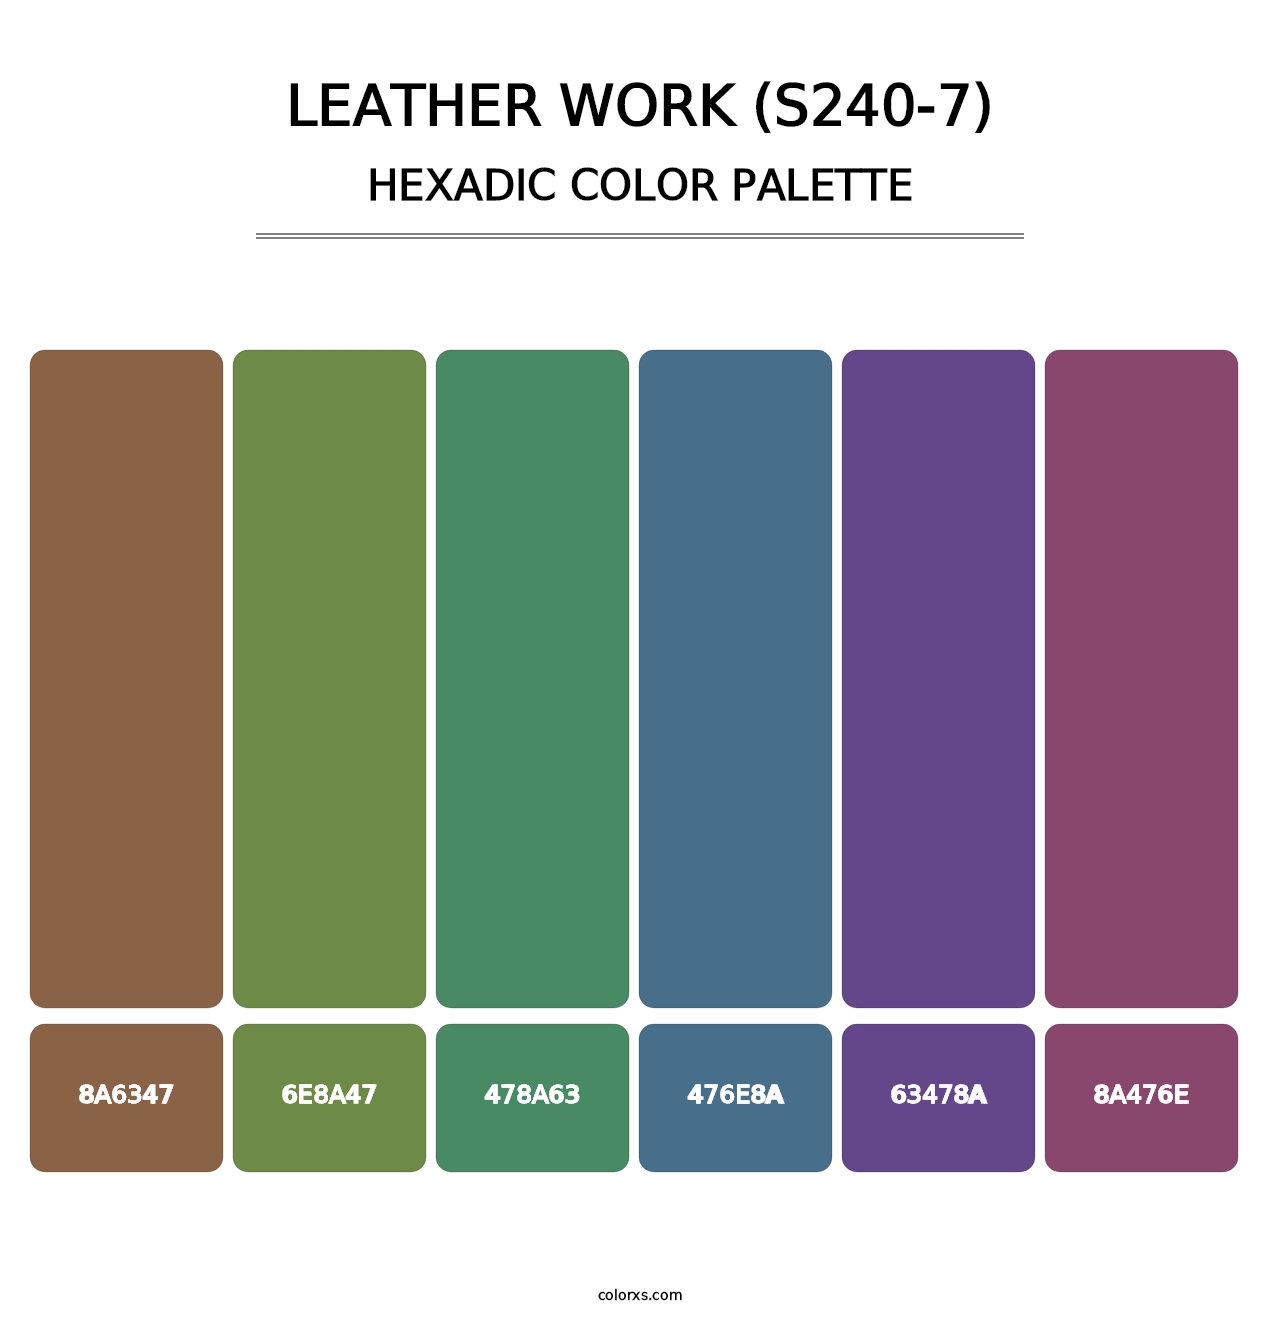 Leather Work (S240-7) - Hexadic Color Palette